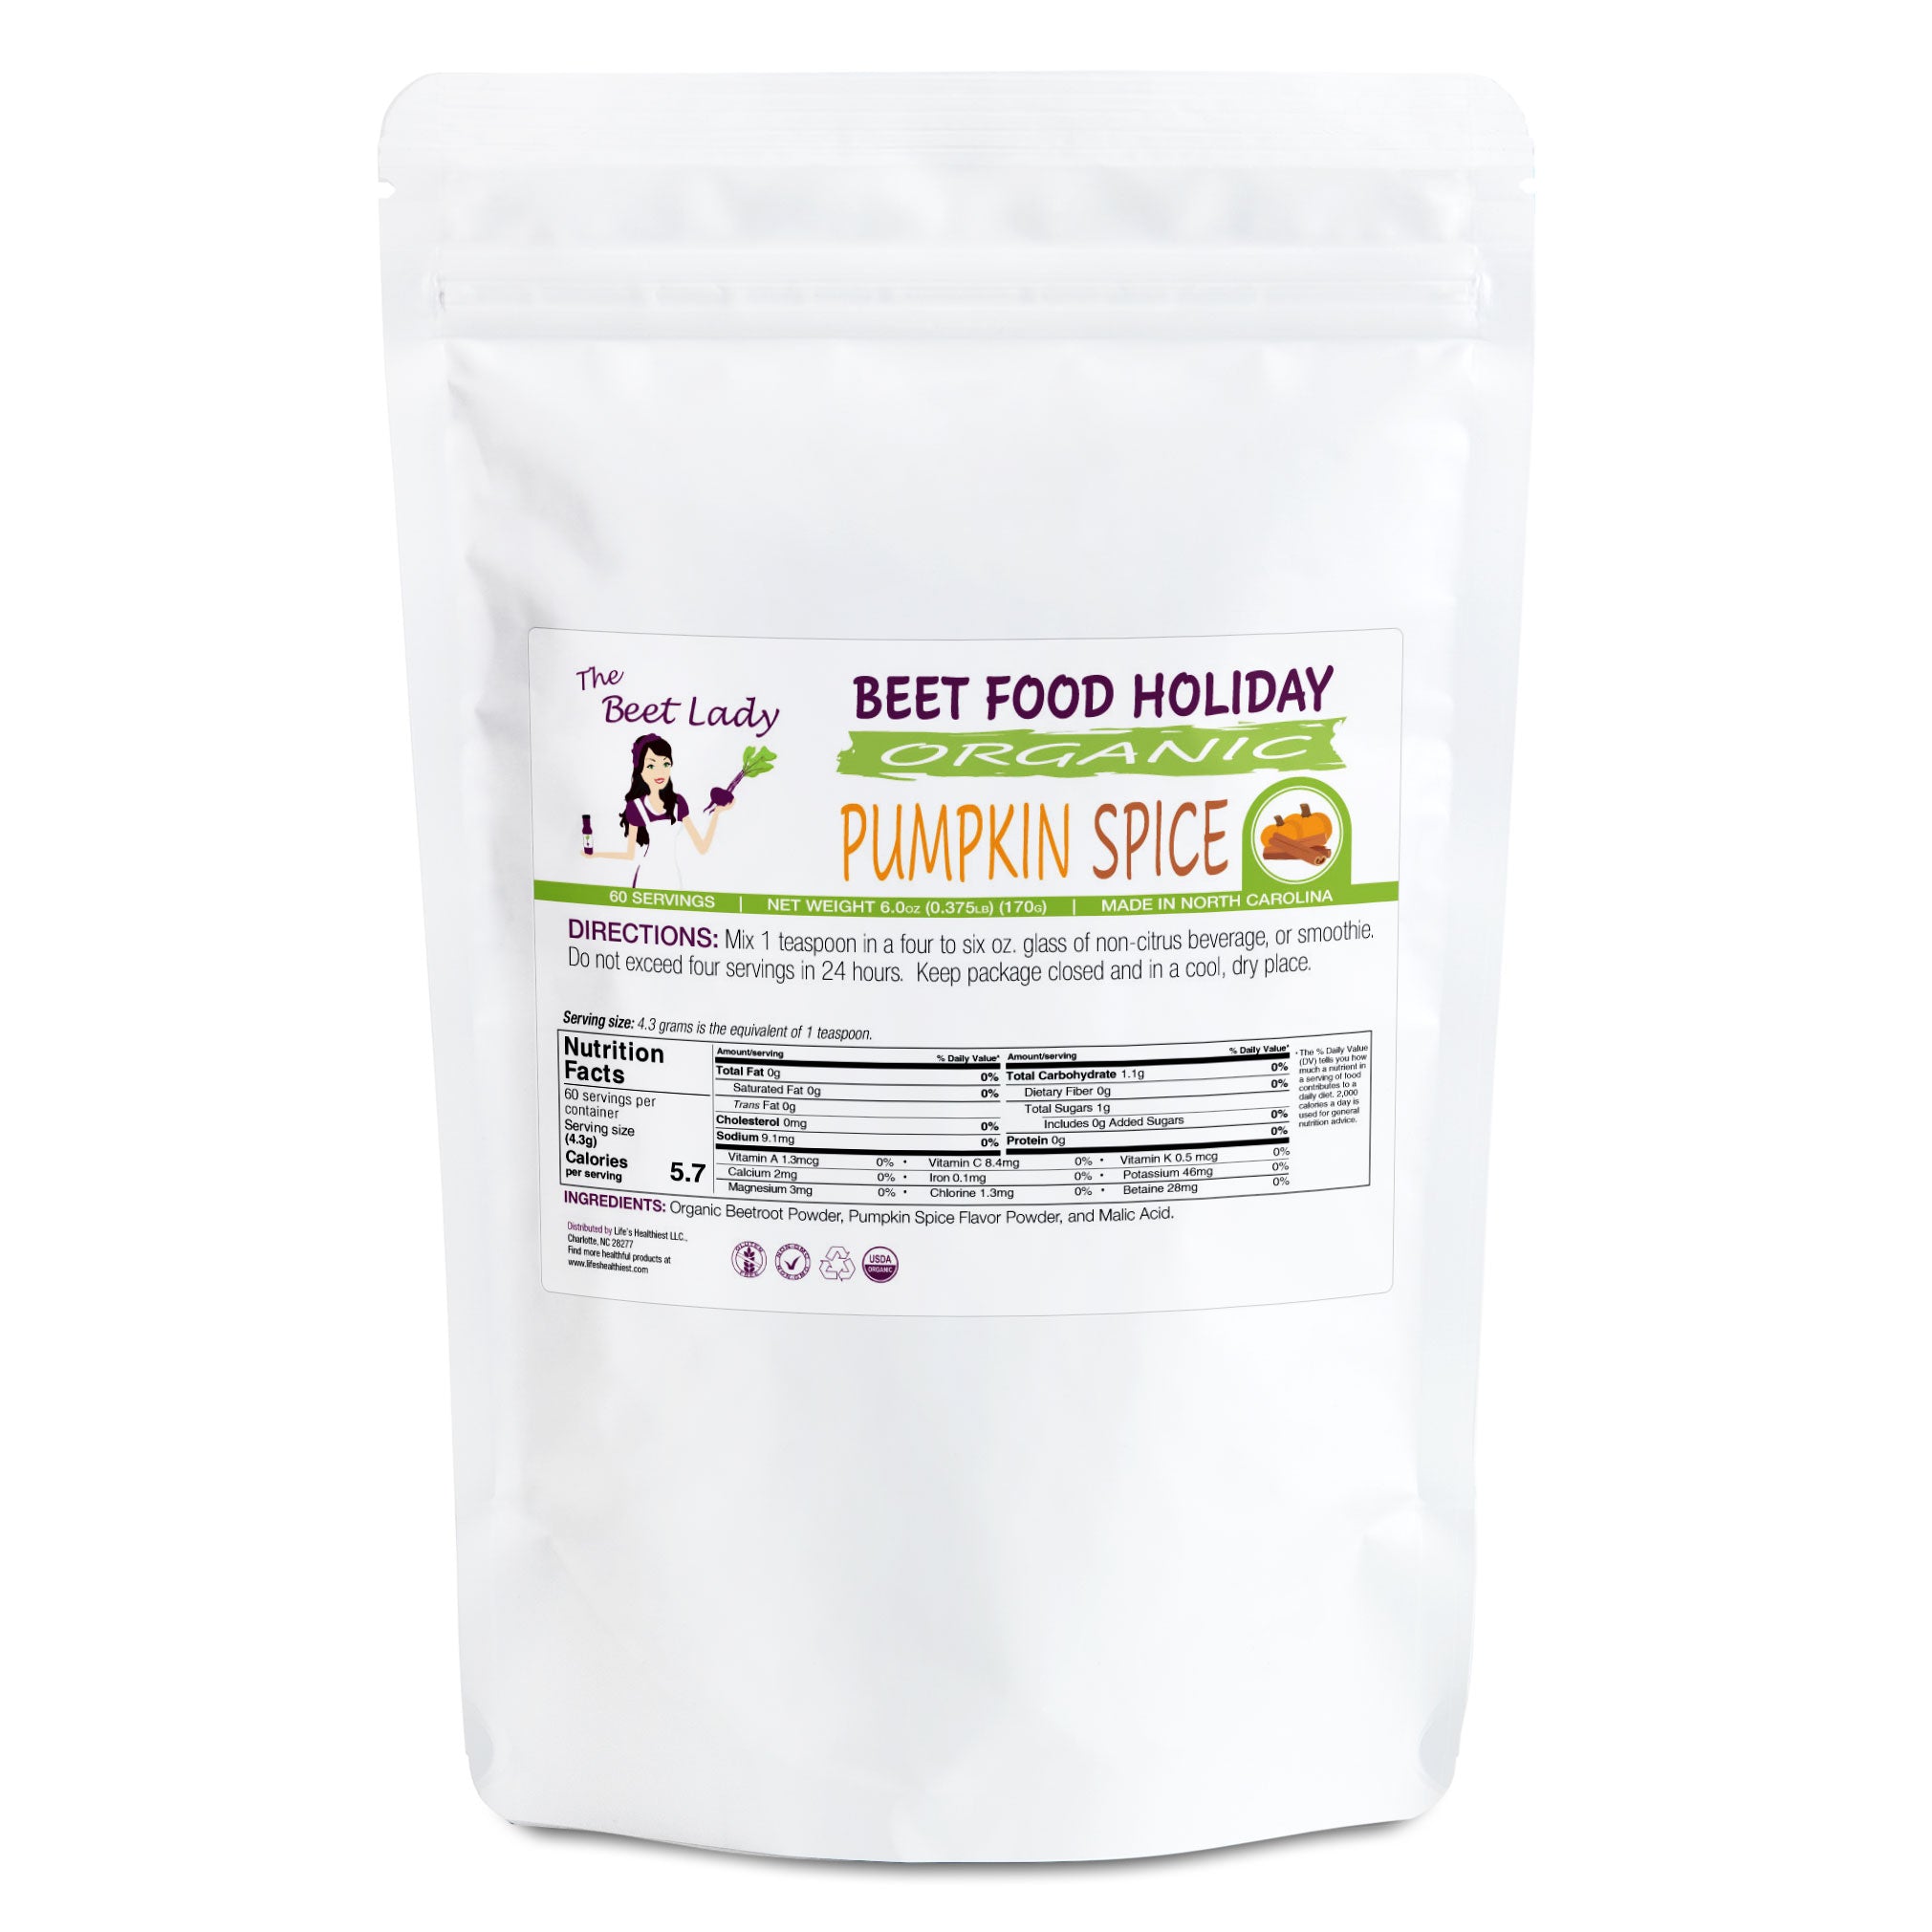 The Beet Lady HOLIDAY PUMPKIN SPICE Beet Food Nutritional Therapy powder blend.  Organic, plant-based, non-GMO.  6 oz